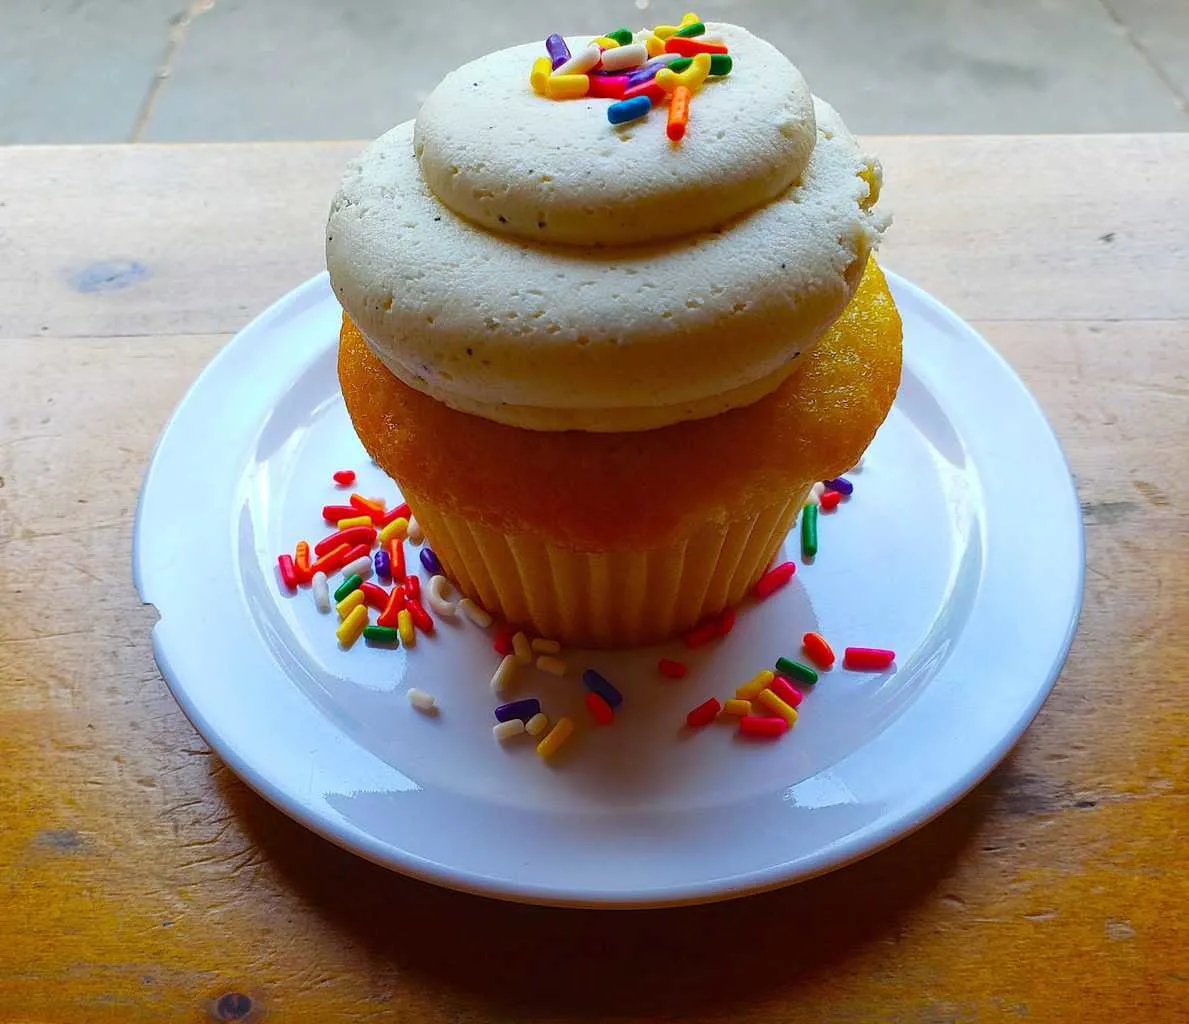 A large cupcake with frosting and multicolored sprinkles from Greenwich village is one of the top edible unusual things to do in NYC.